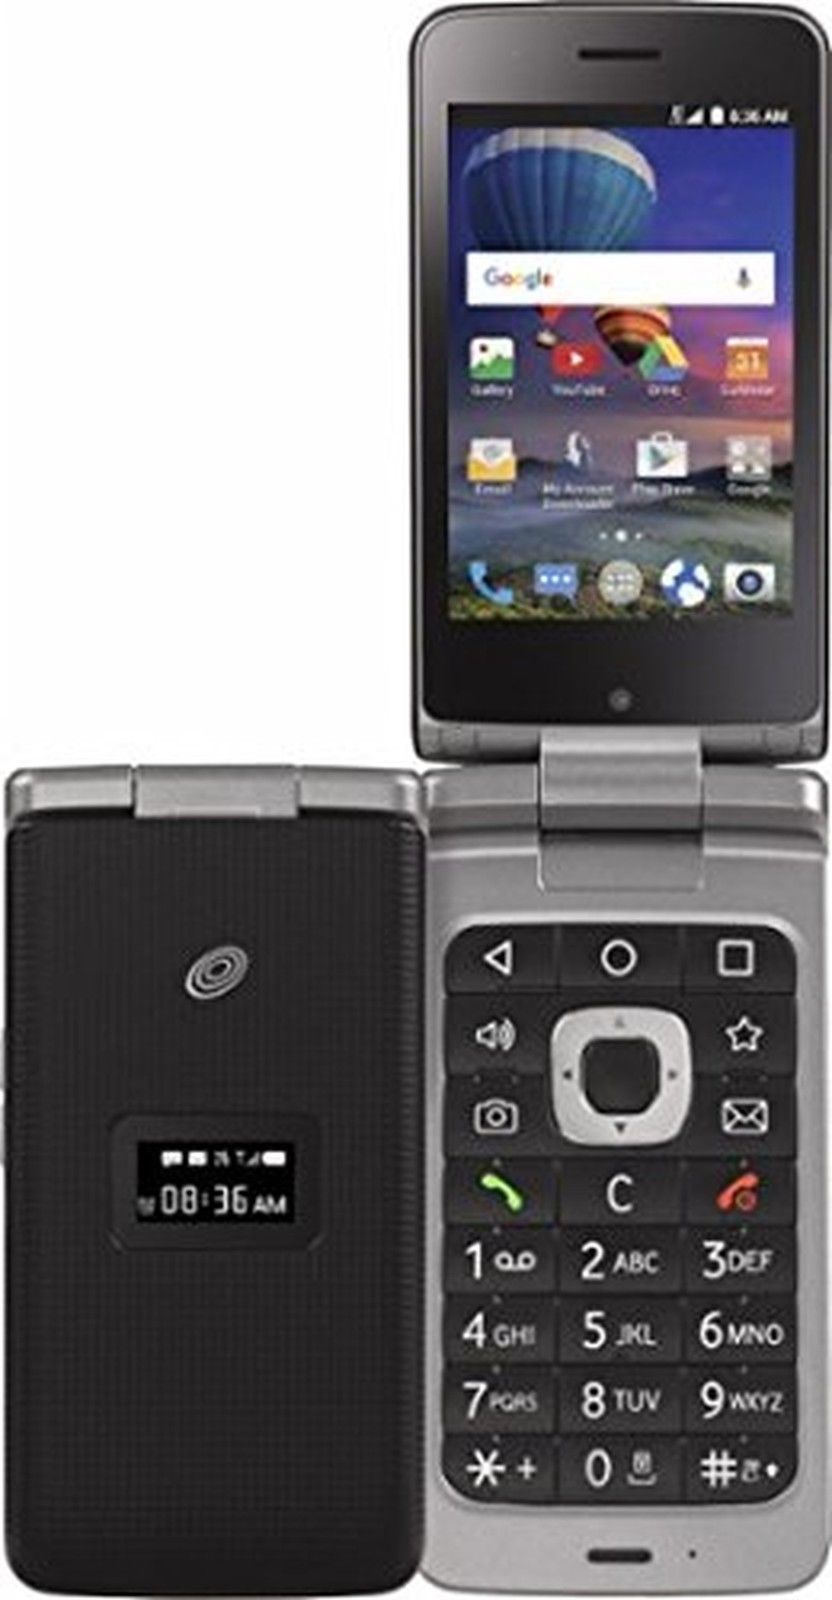 Tracfone Zte Cymbal T Android Flip 4g Lte Prepaid Touchscreen Phone